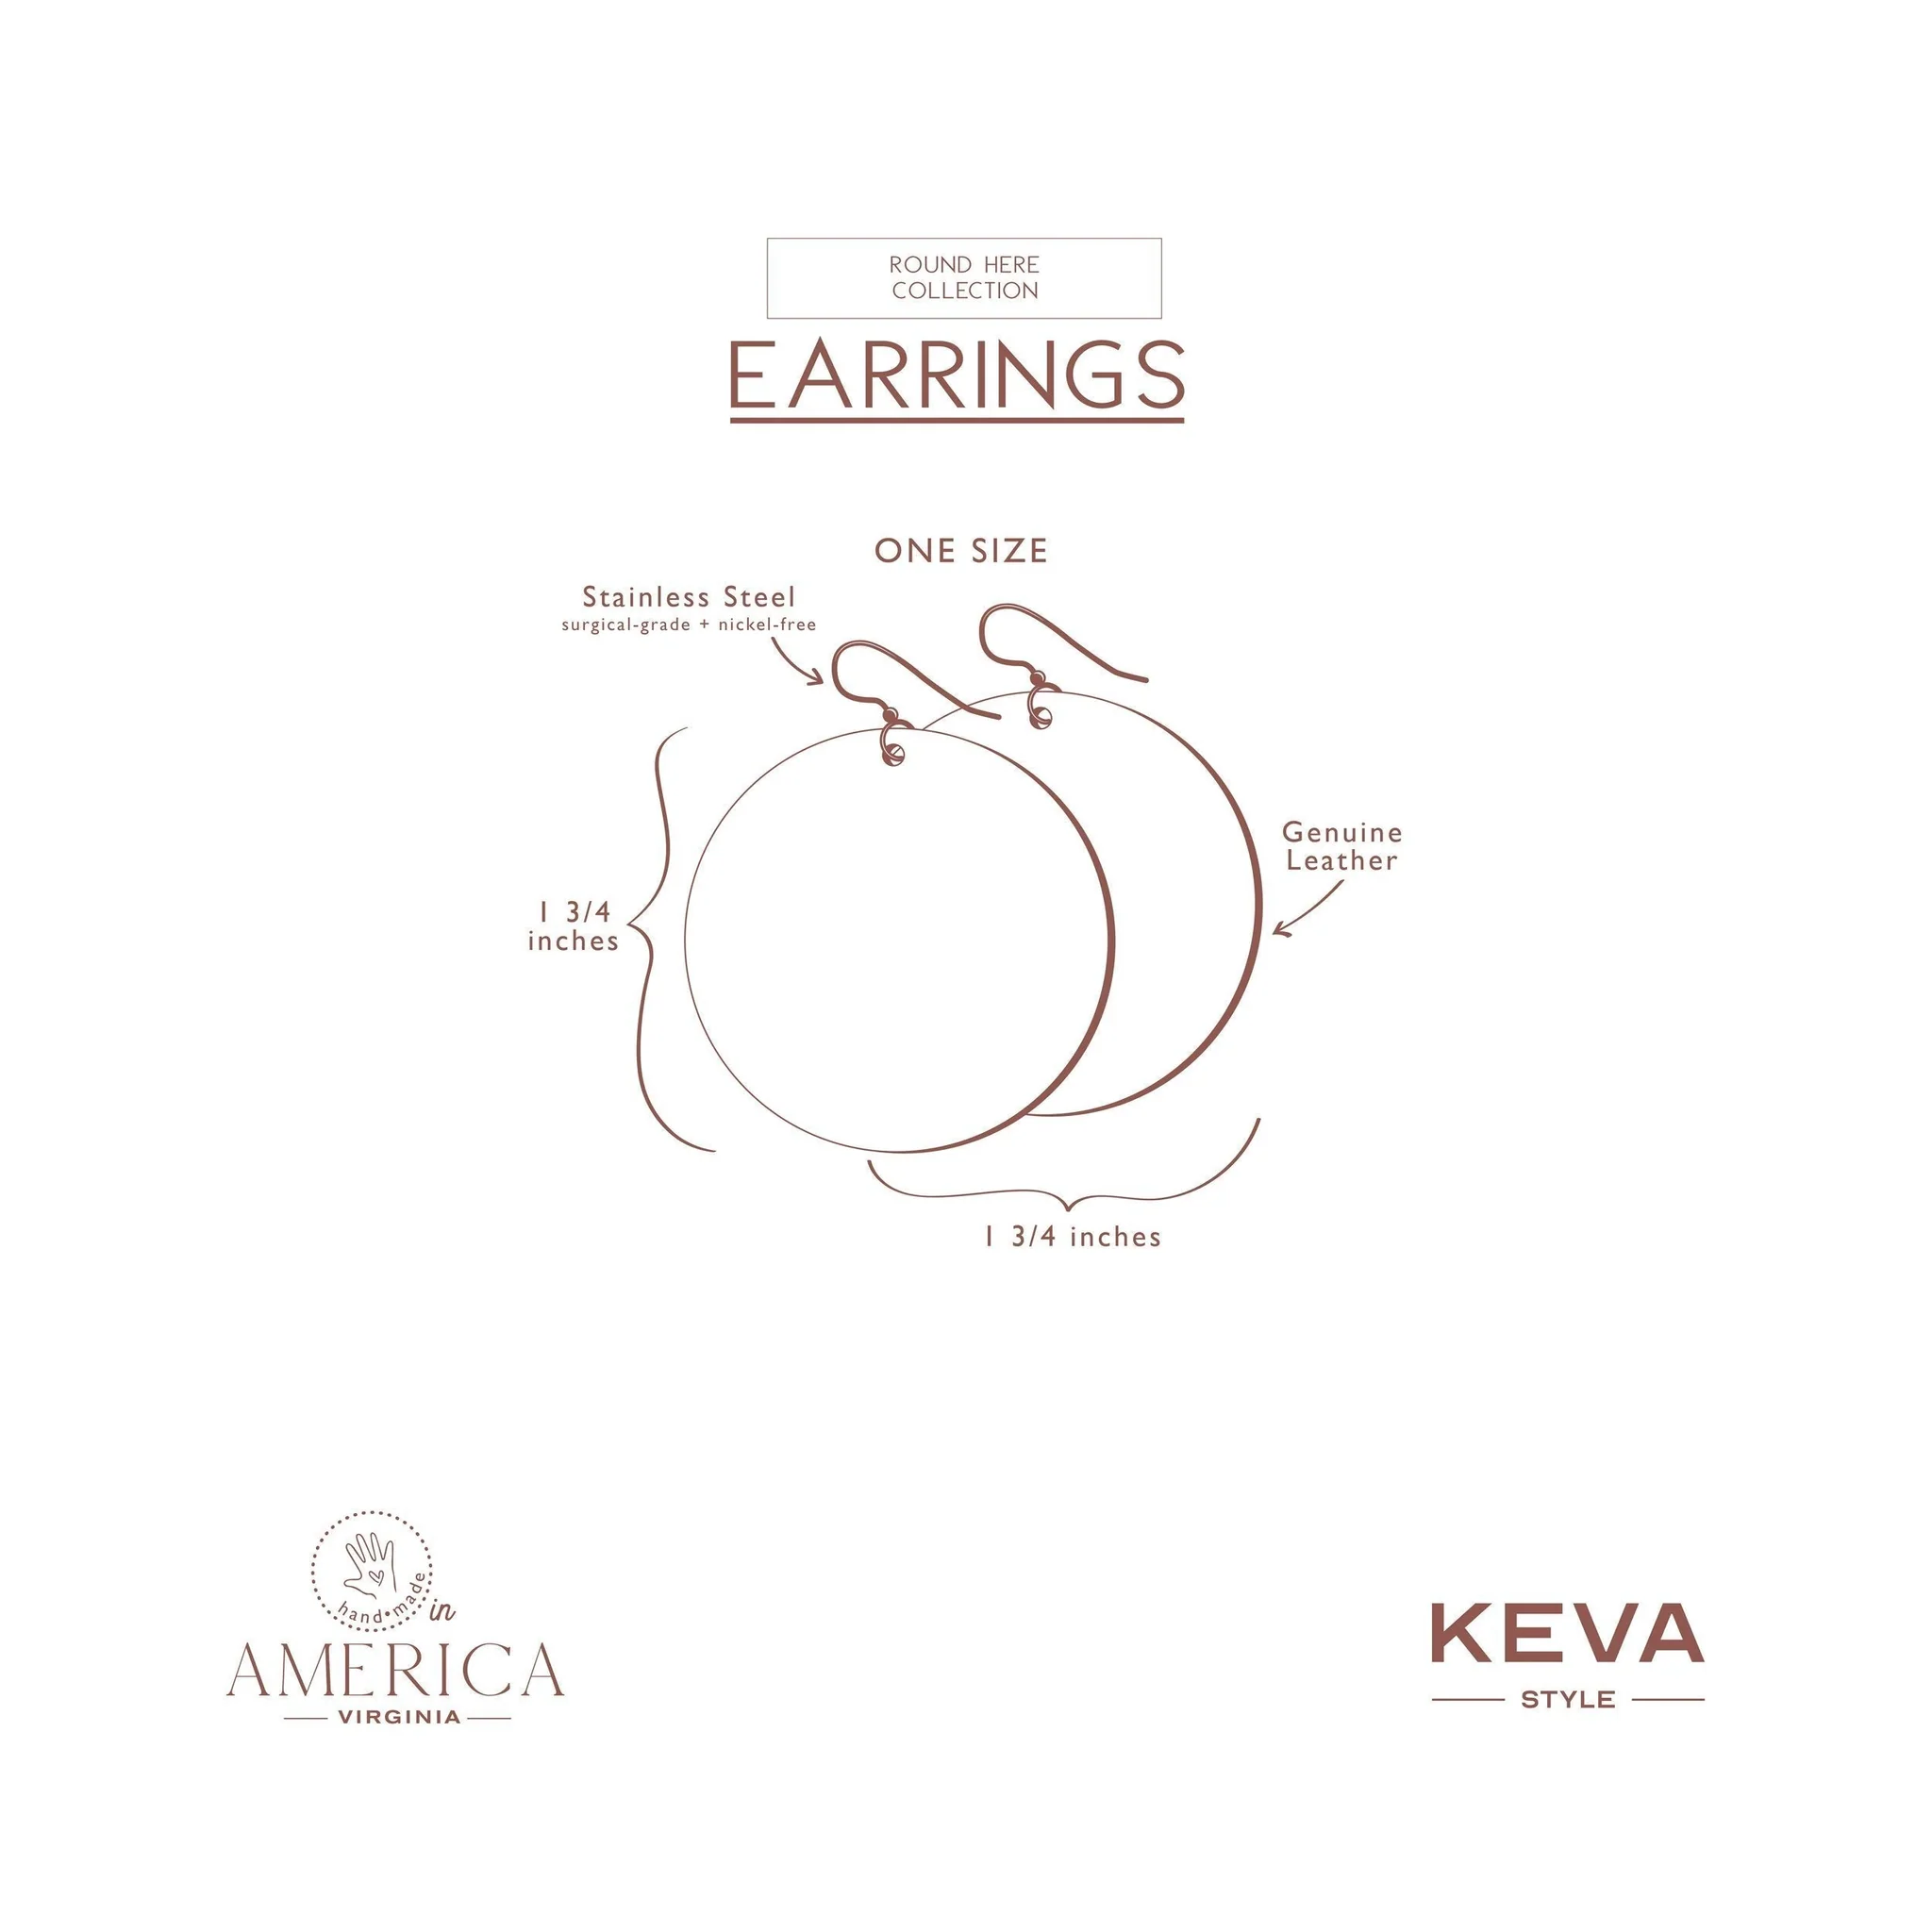 Keva Style Spread Your Wings with White Layered Earrings